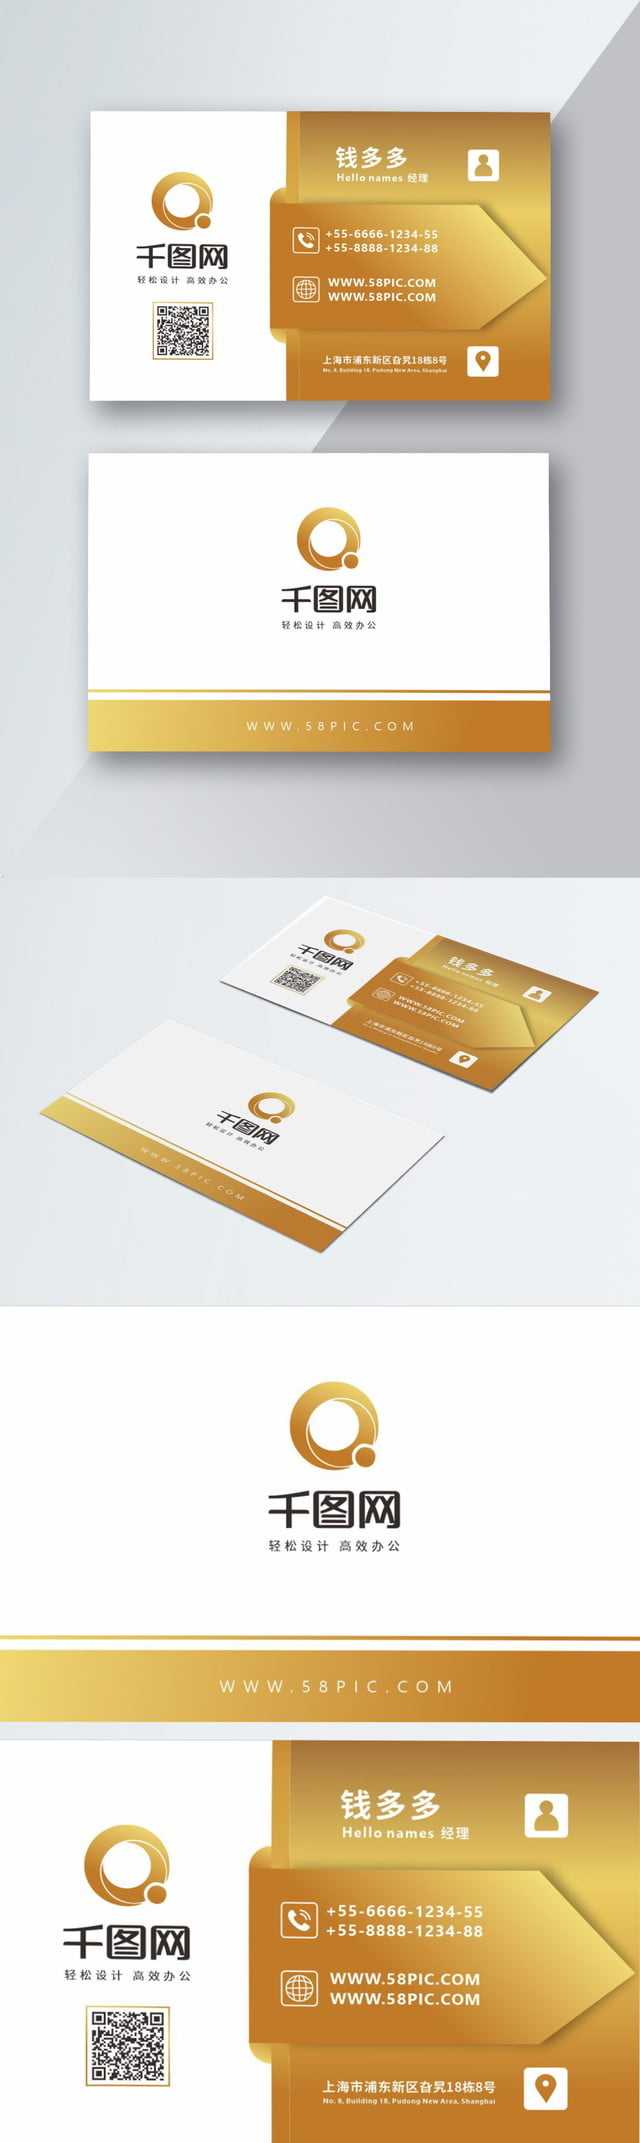 Hotel Business Card Vector Material Hotel Business Card With Visiting Card Templates Download